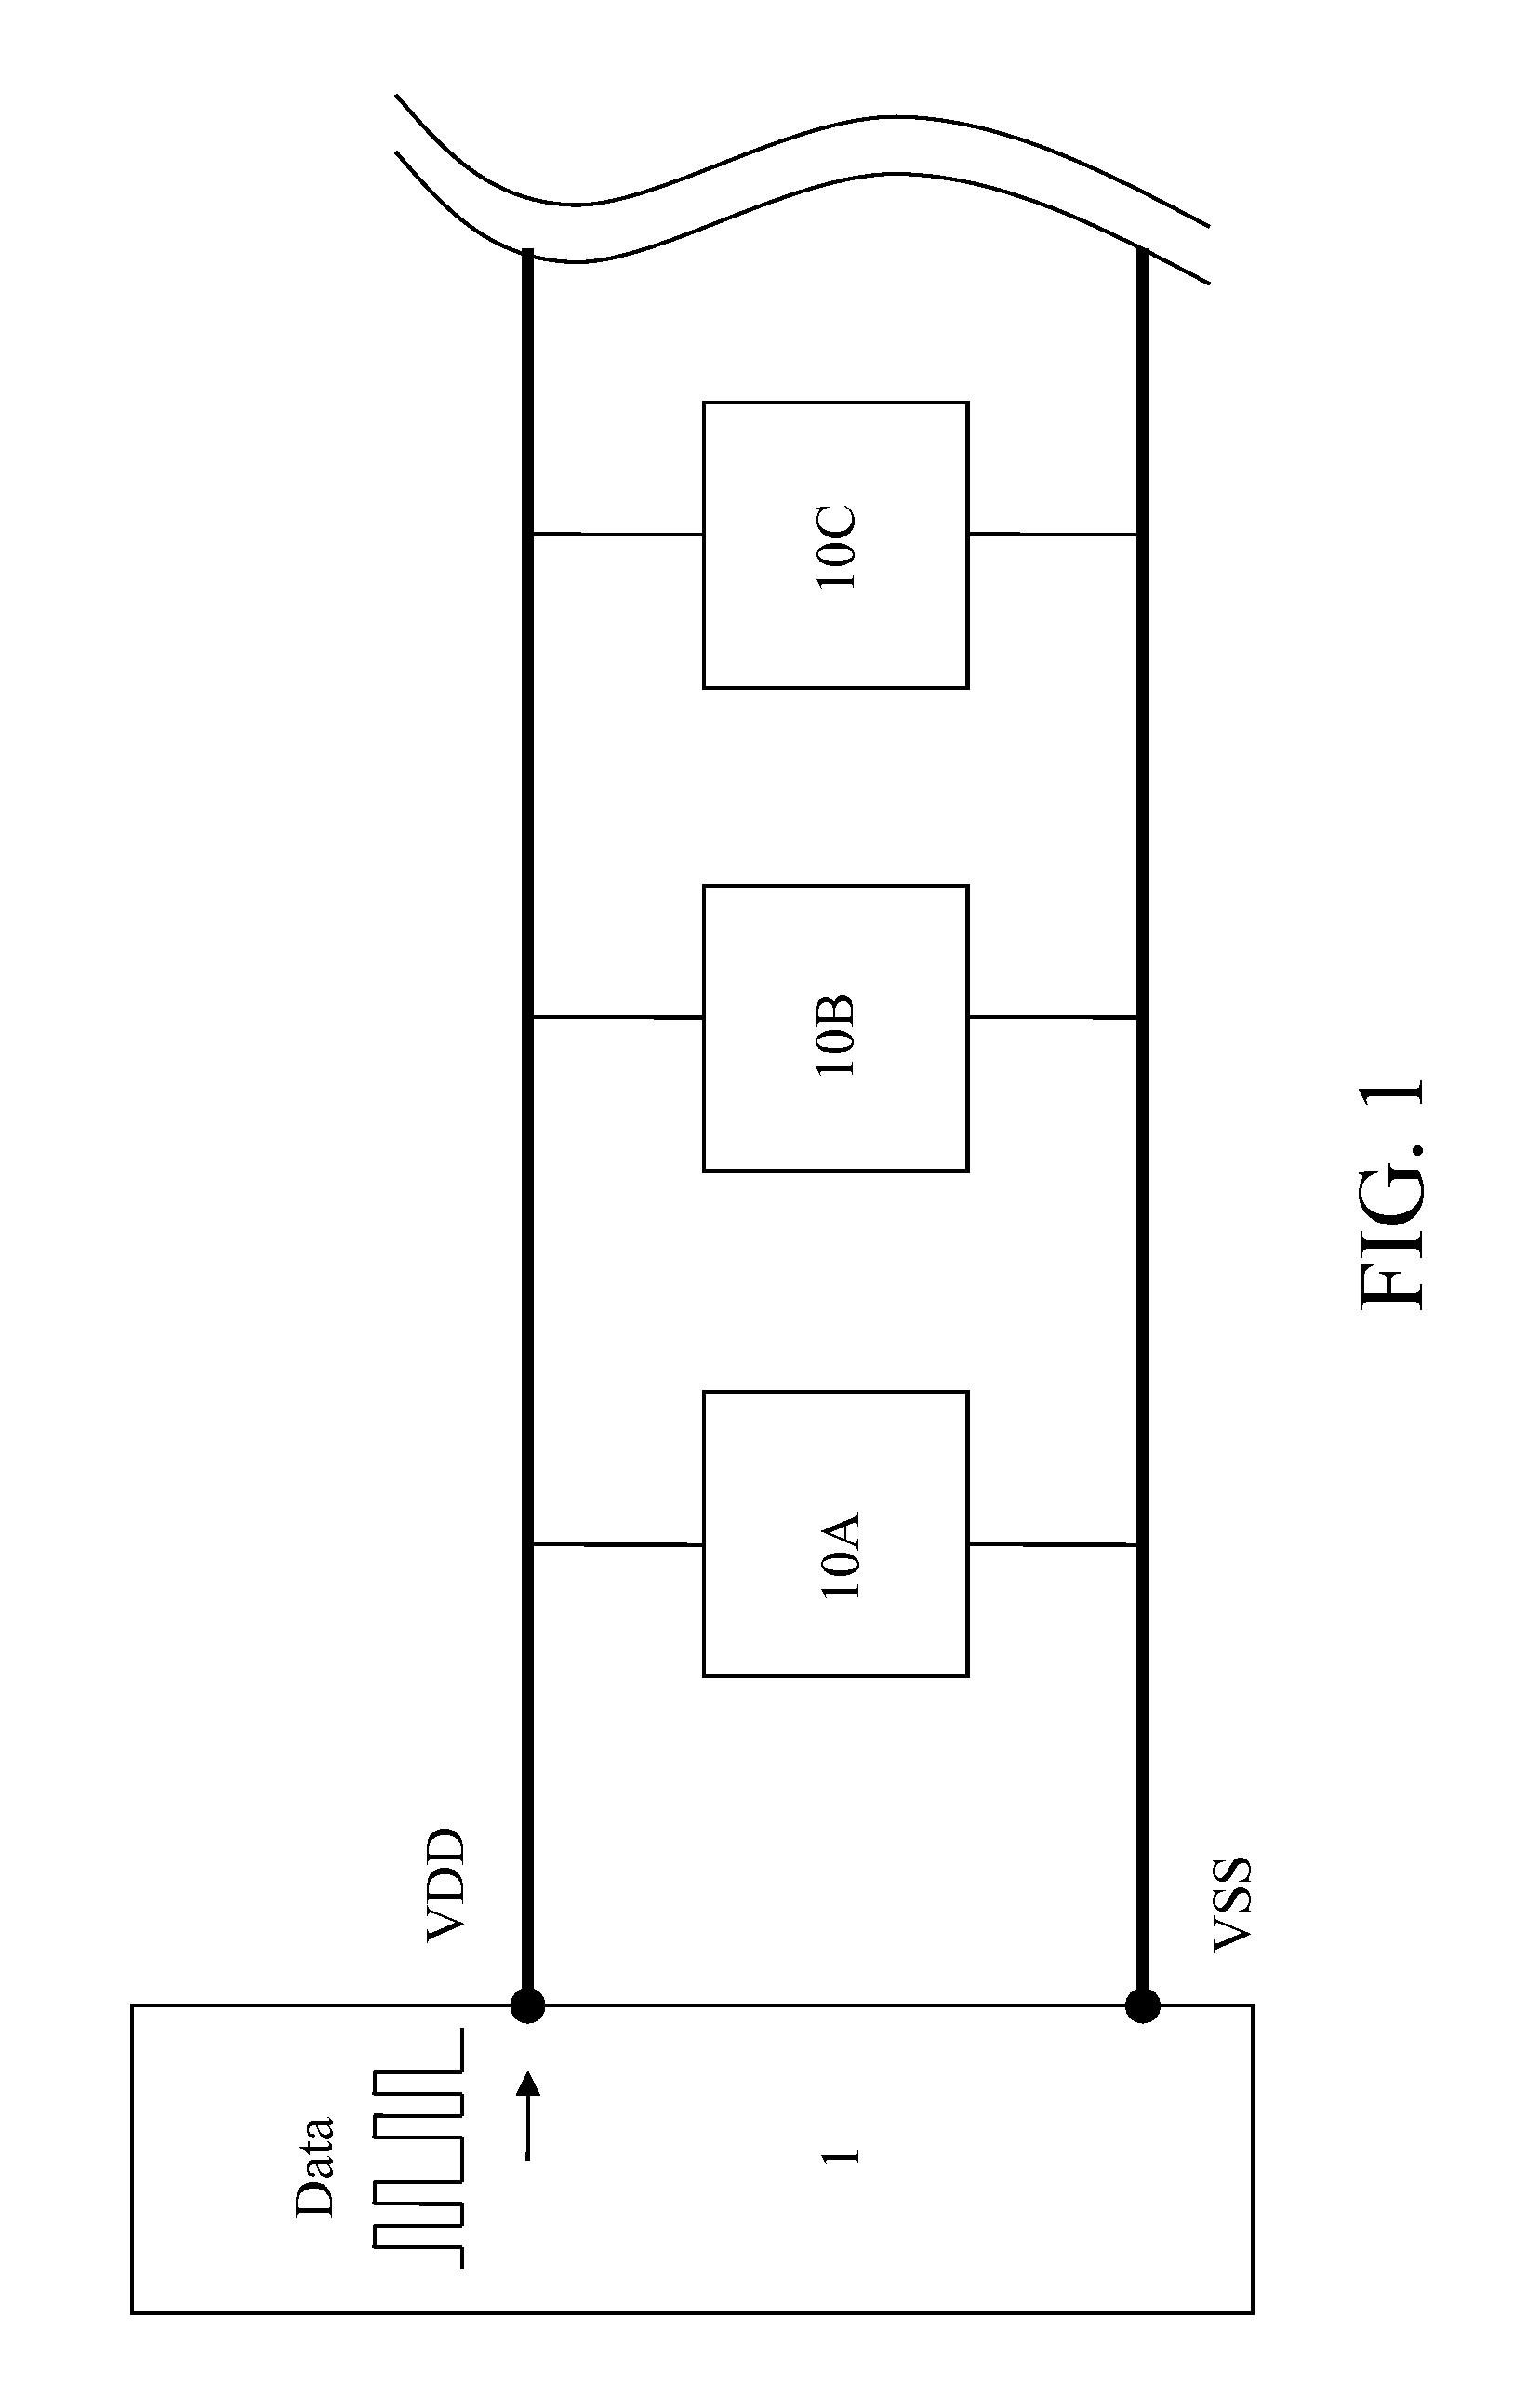 LED package structure with an integrated pin to transmit operation power and control signals